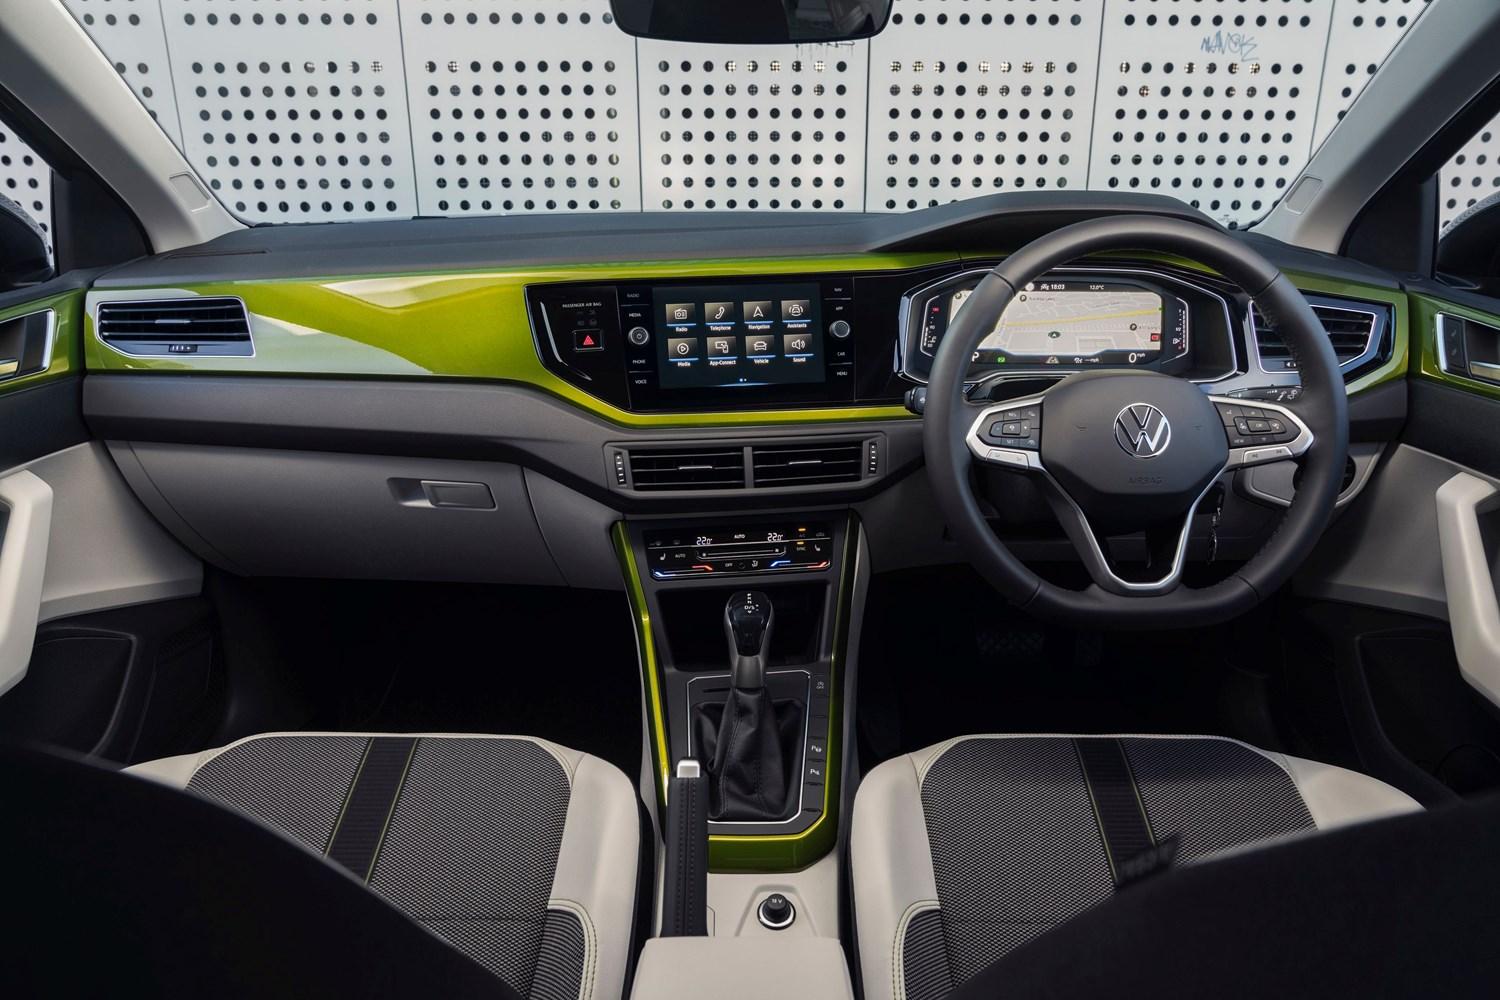 Interior view of the new Volkswagen Taigo in green, close-up on the front passenger seats, central infotainment system and steering wheel